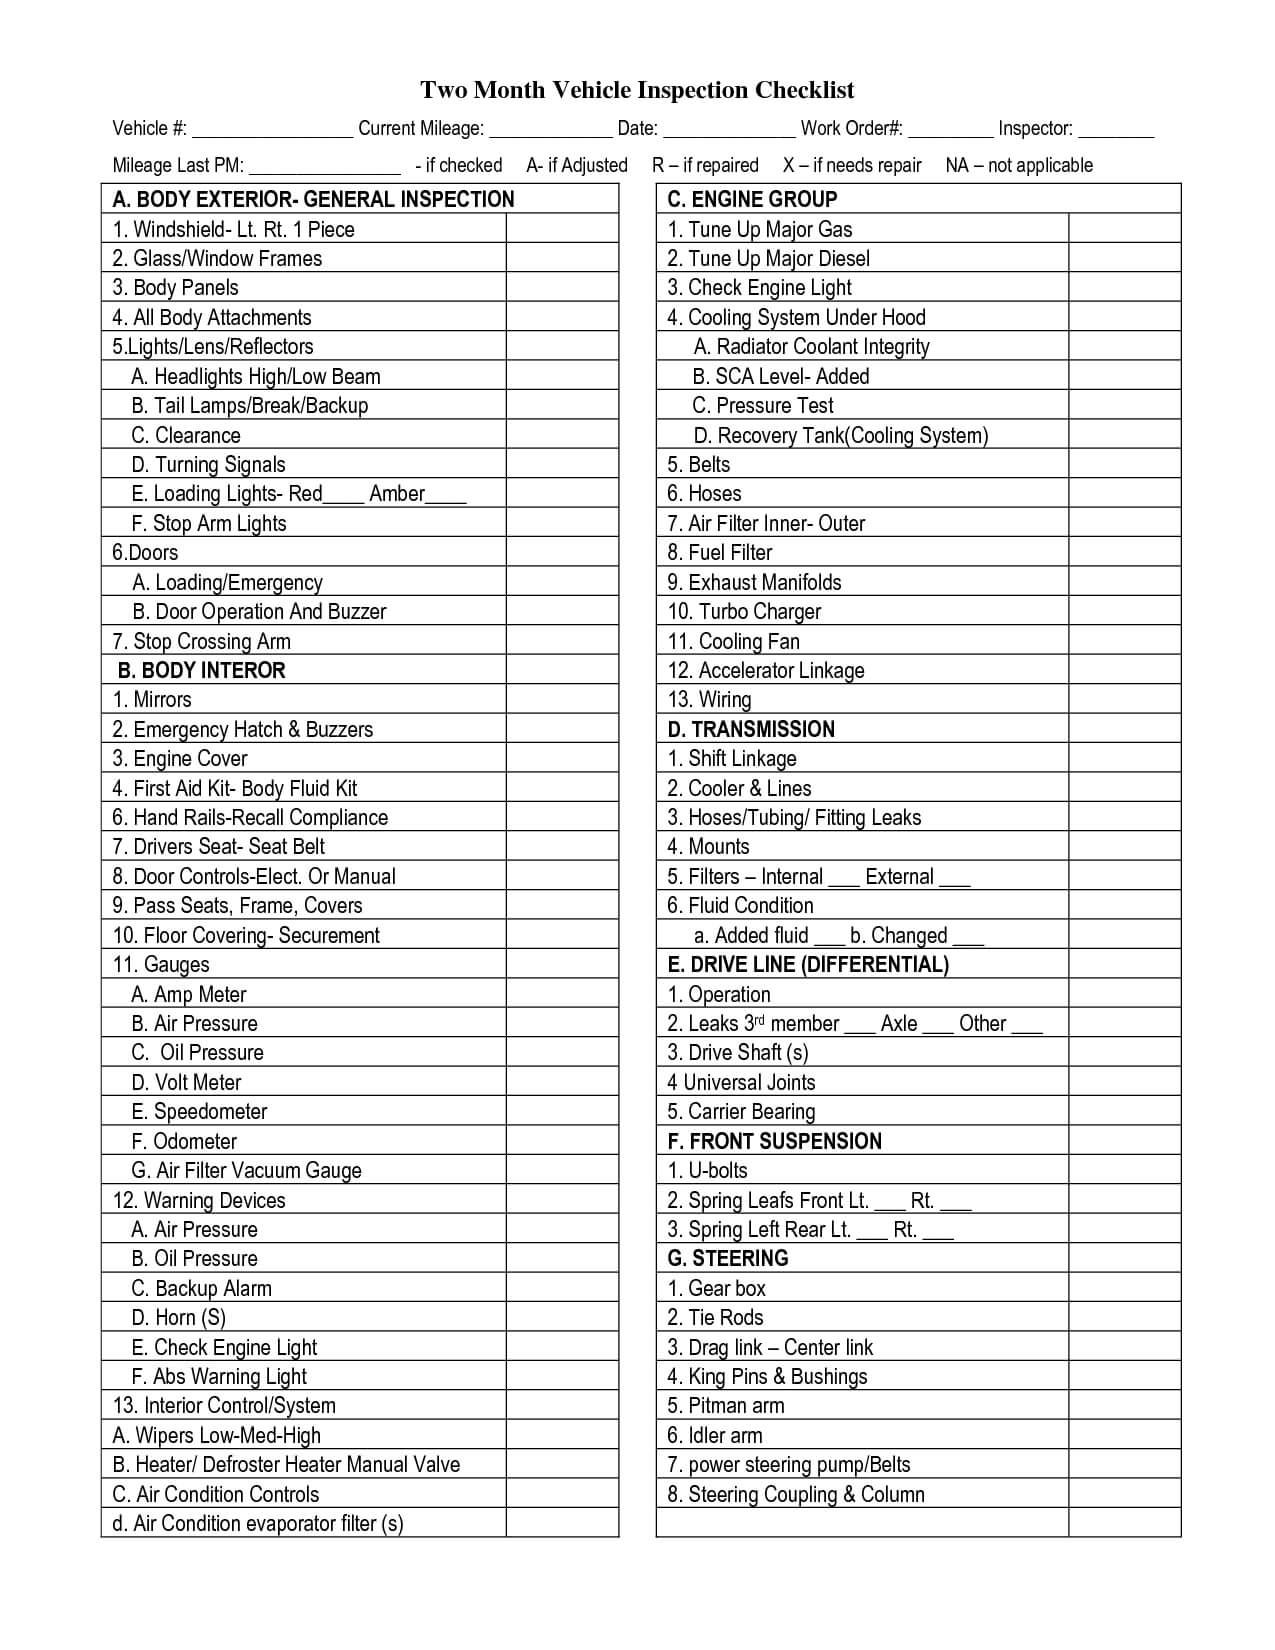 Vehicle Inspection Checklist Template | Vehicle Inspection Regarding Vehicle Checklist Template Word